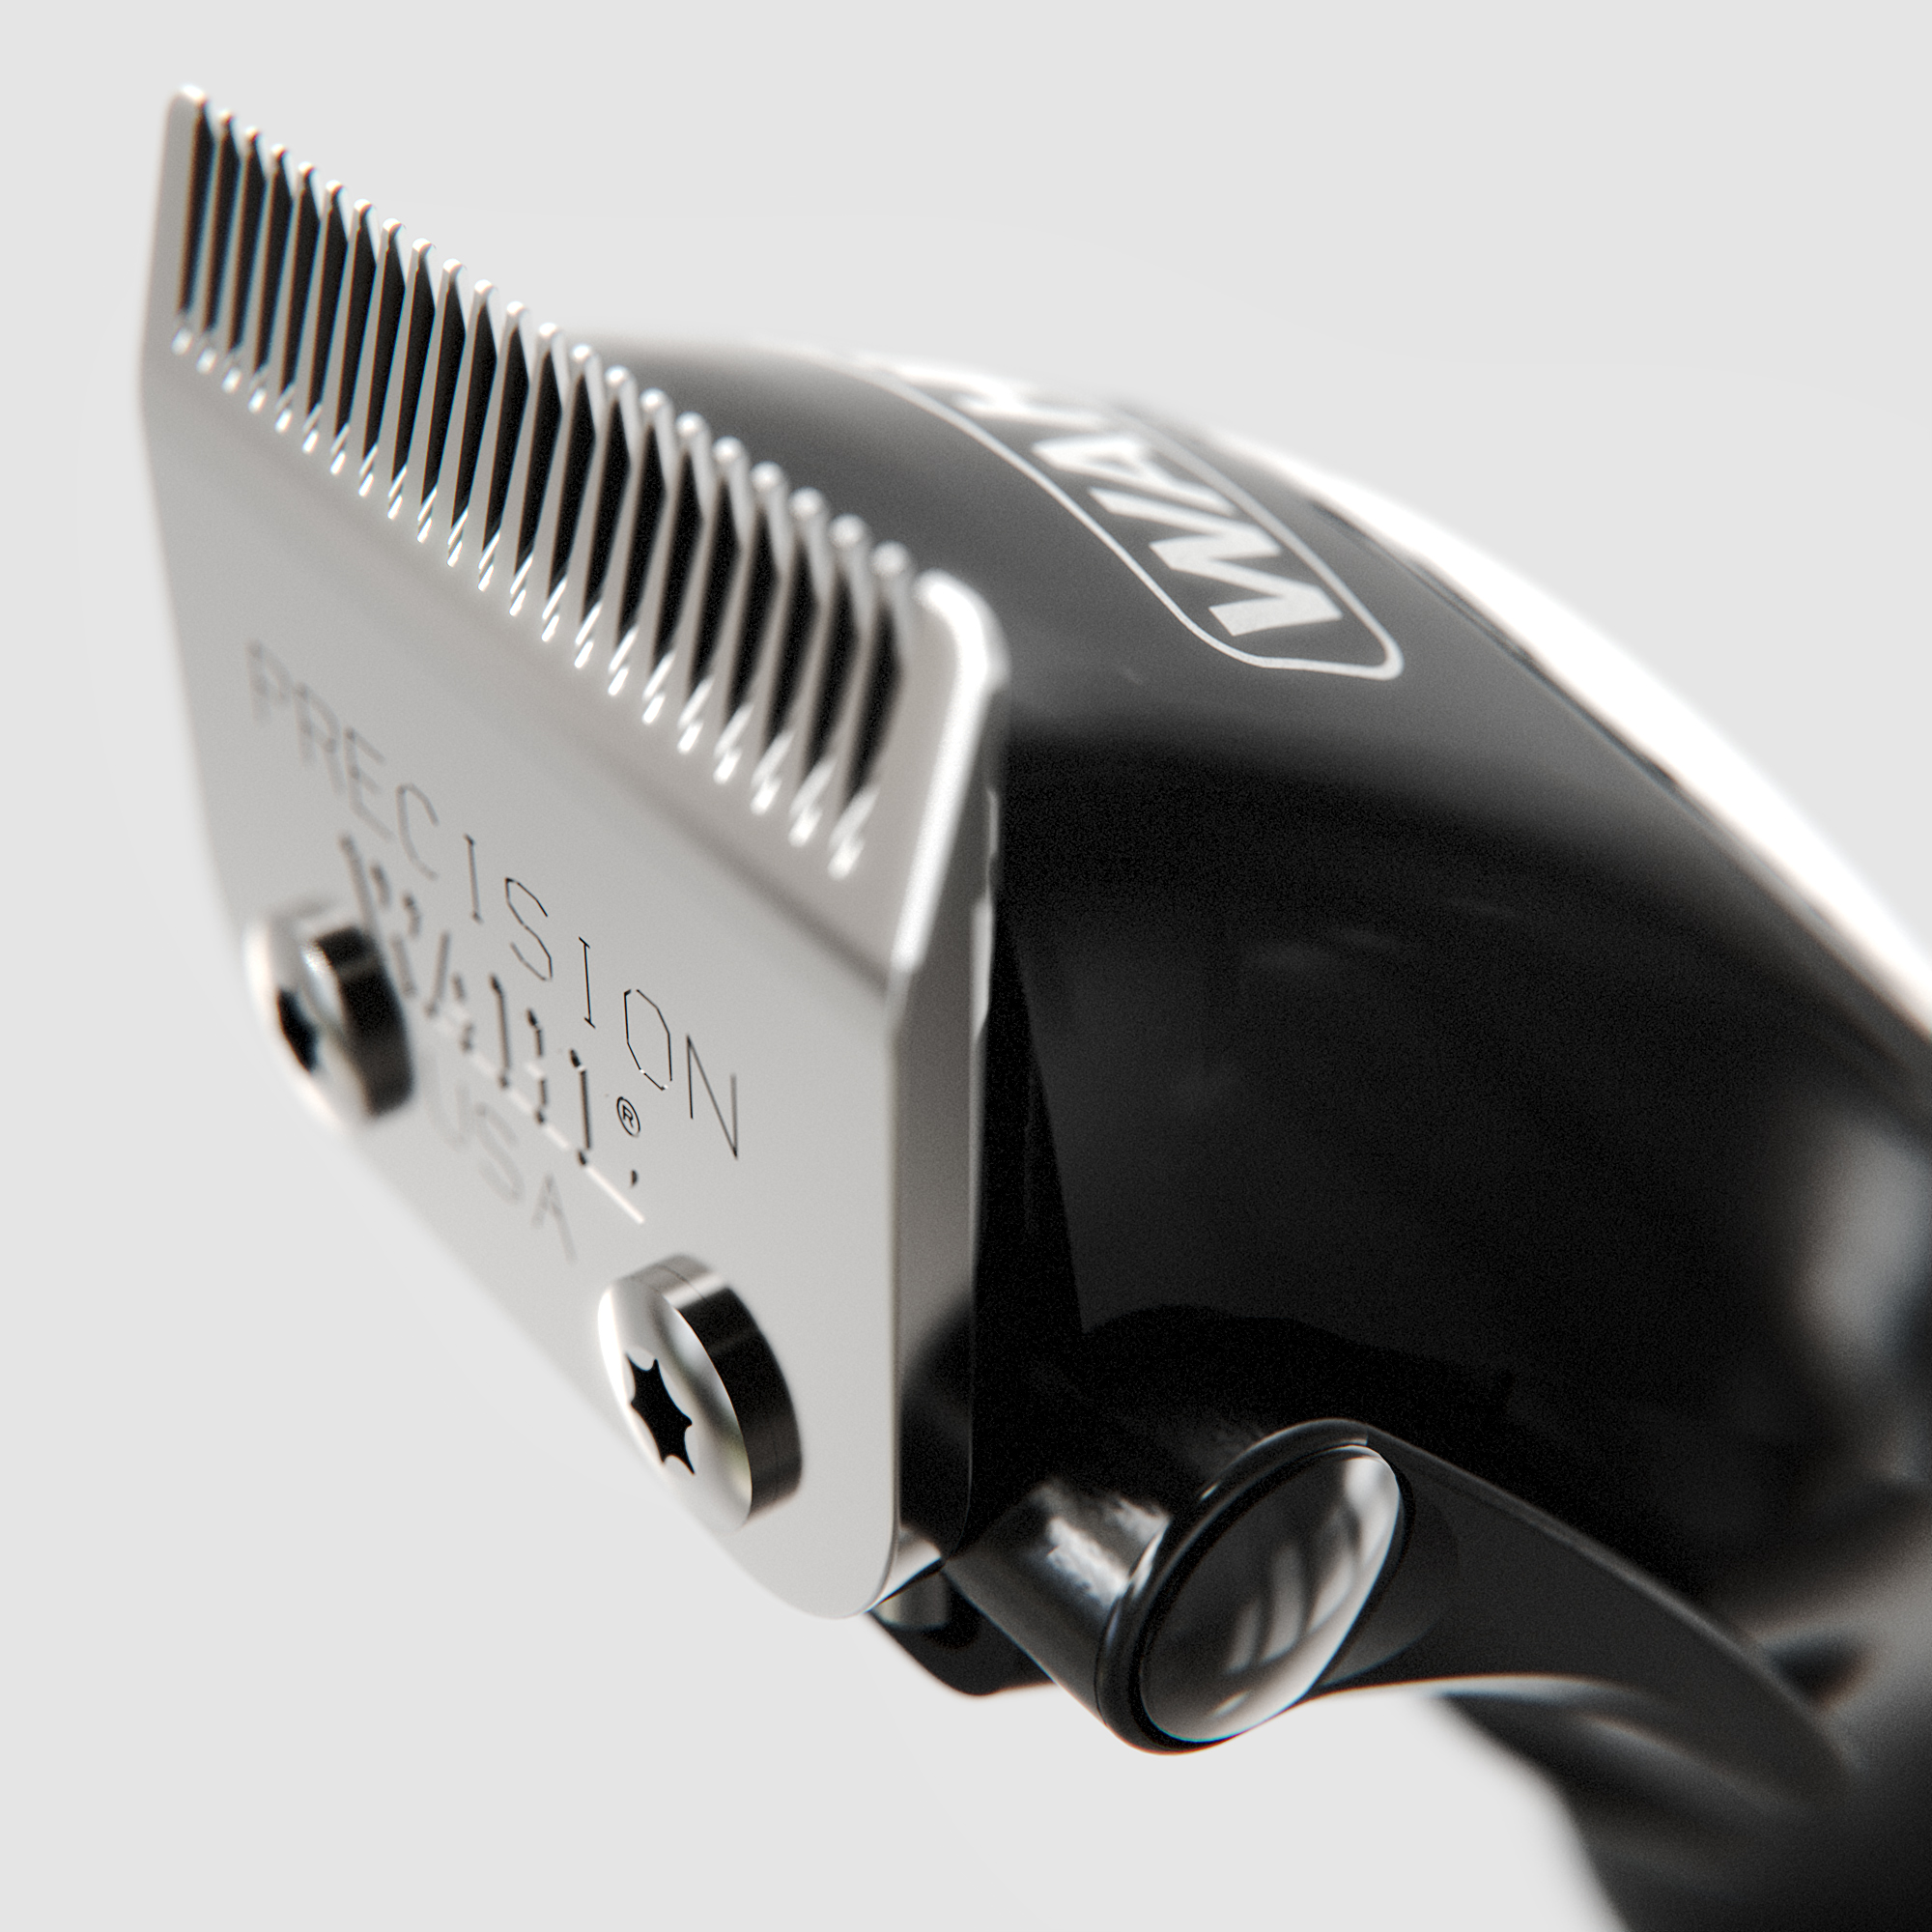 Wahl Power Clipper - Close up view of blades